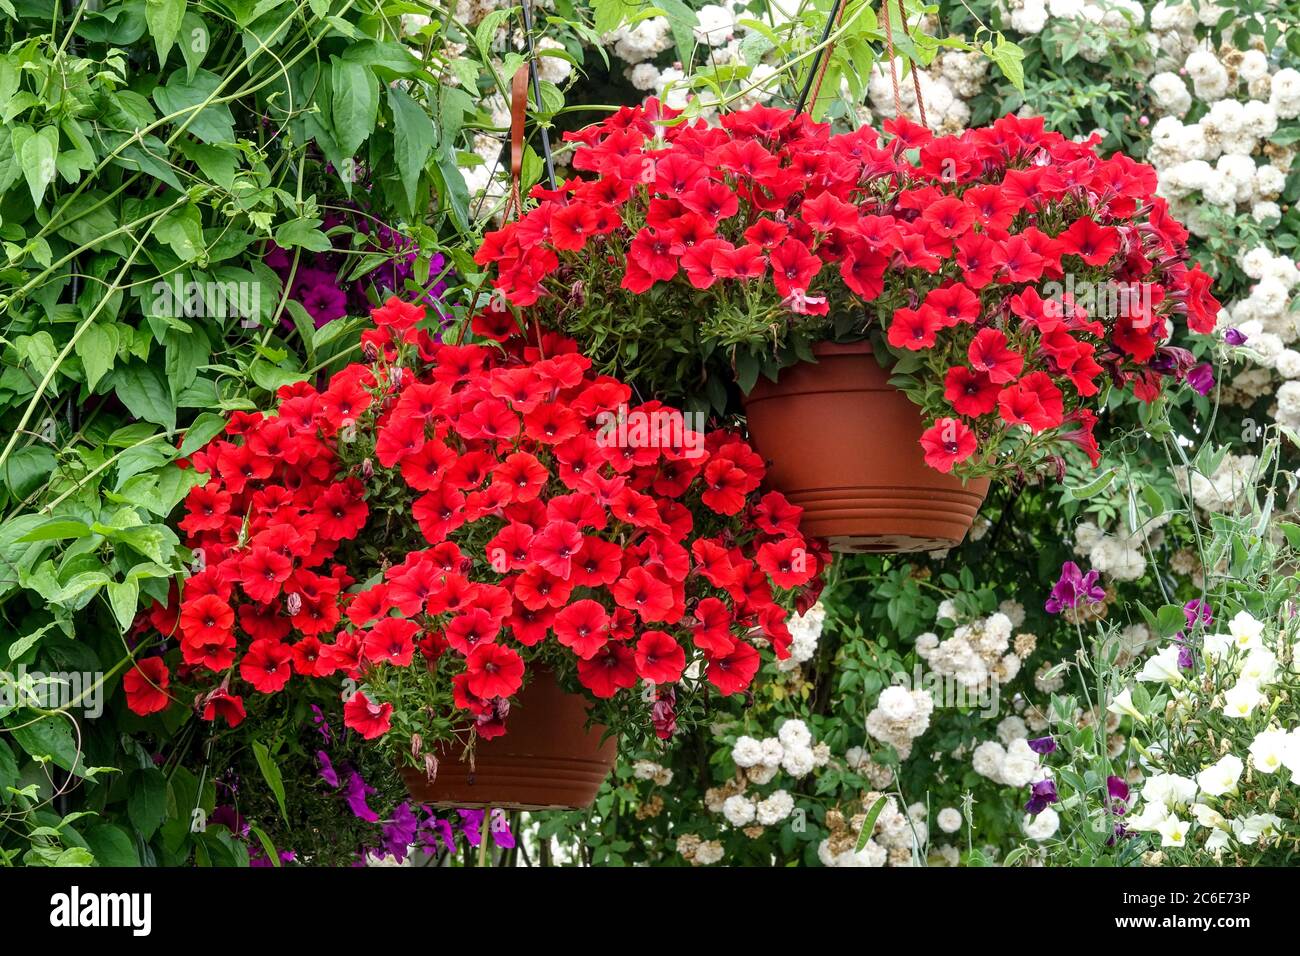 Red petunias in hanging pots Stock Photo